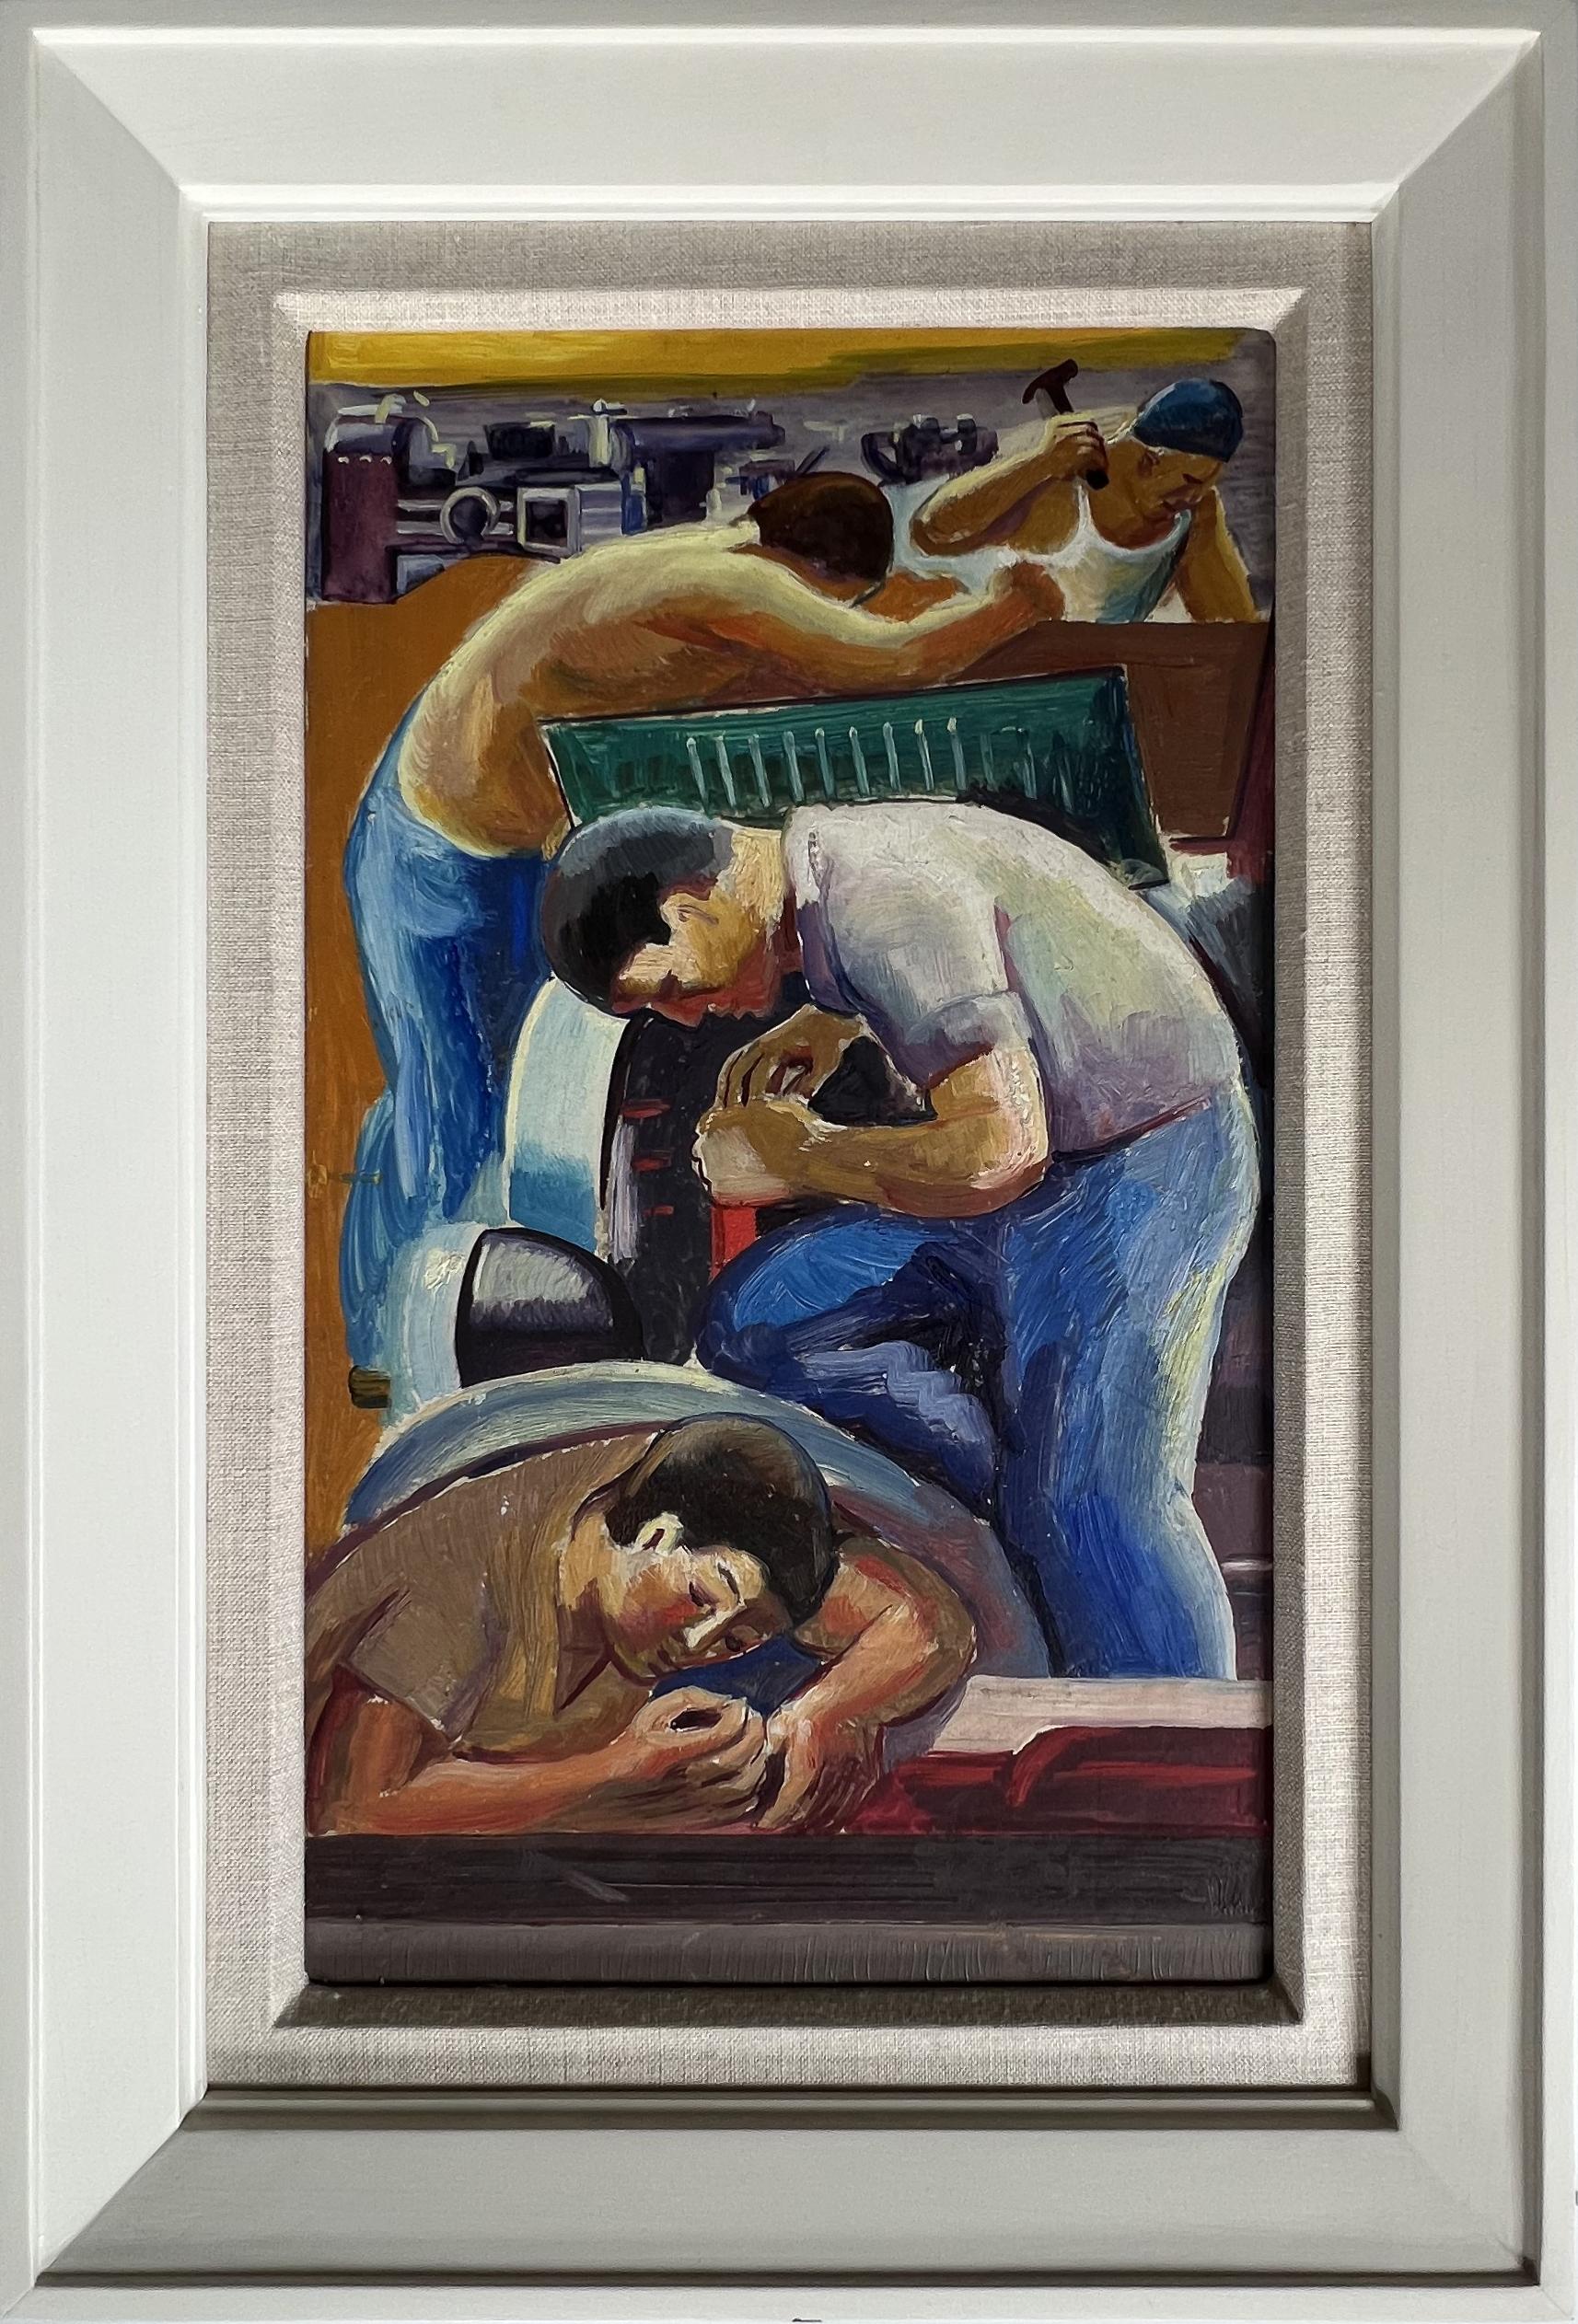 Men Working Mural Study American Scene Social Realism Mid 20th Century Modern  - Painting by Jo Cain